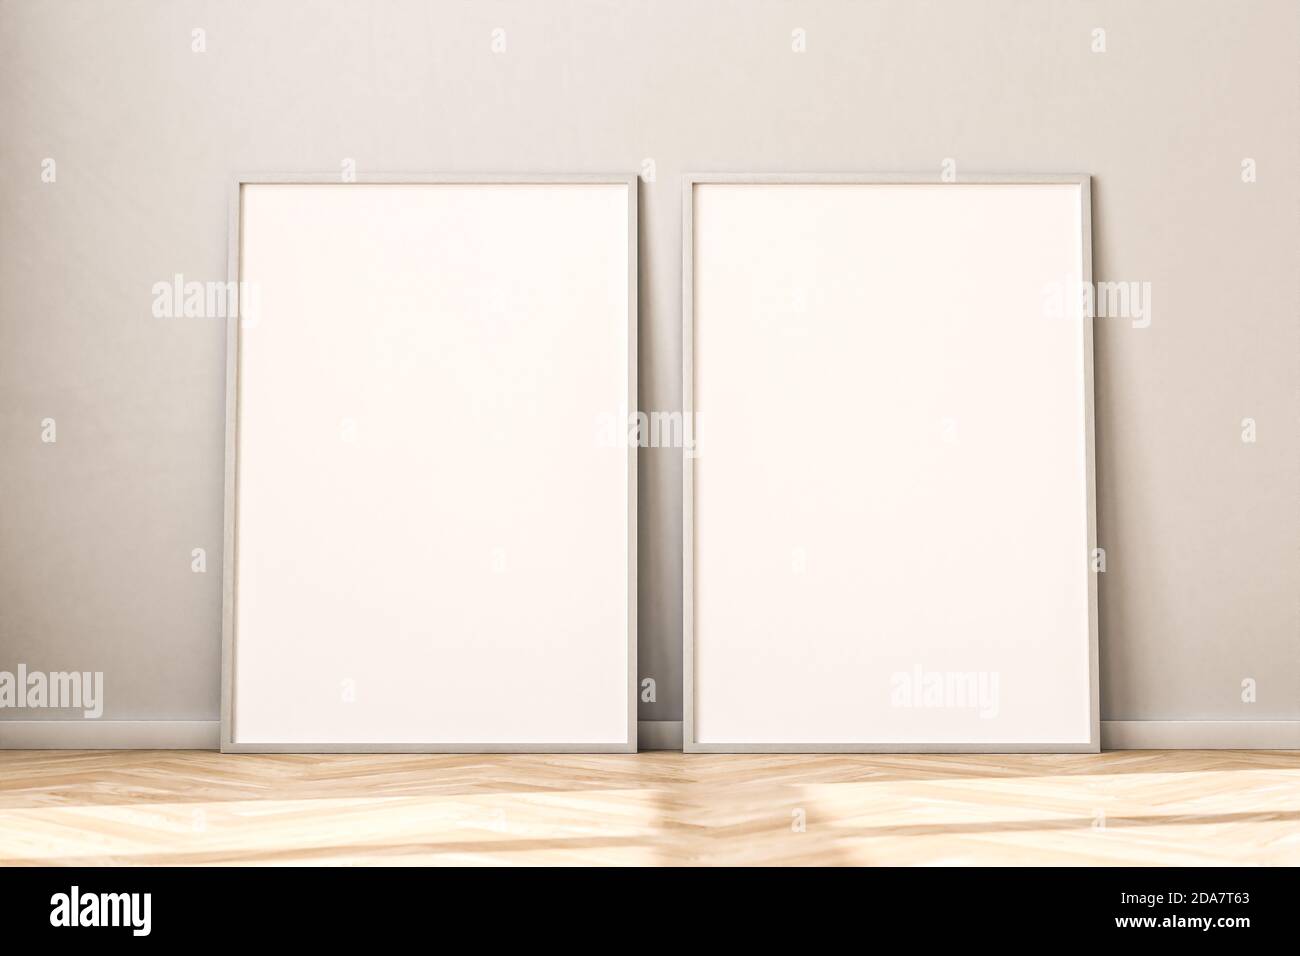 Two empty Picture Frames on parquet floor leaning against bright wall. Sunlight flooding in from the left. 3d render mockup. Stock Photo